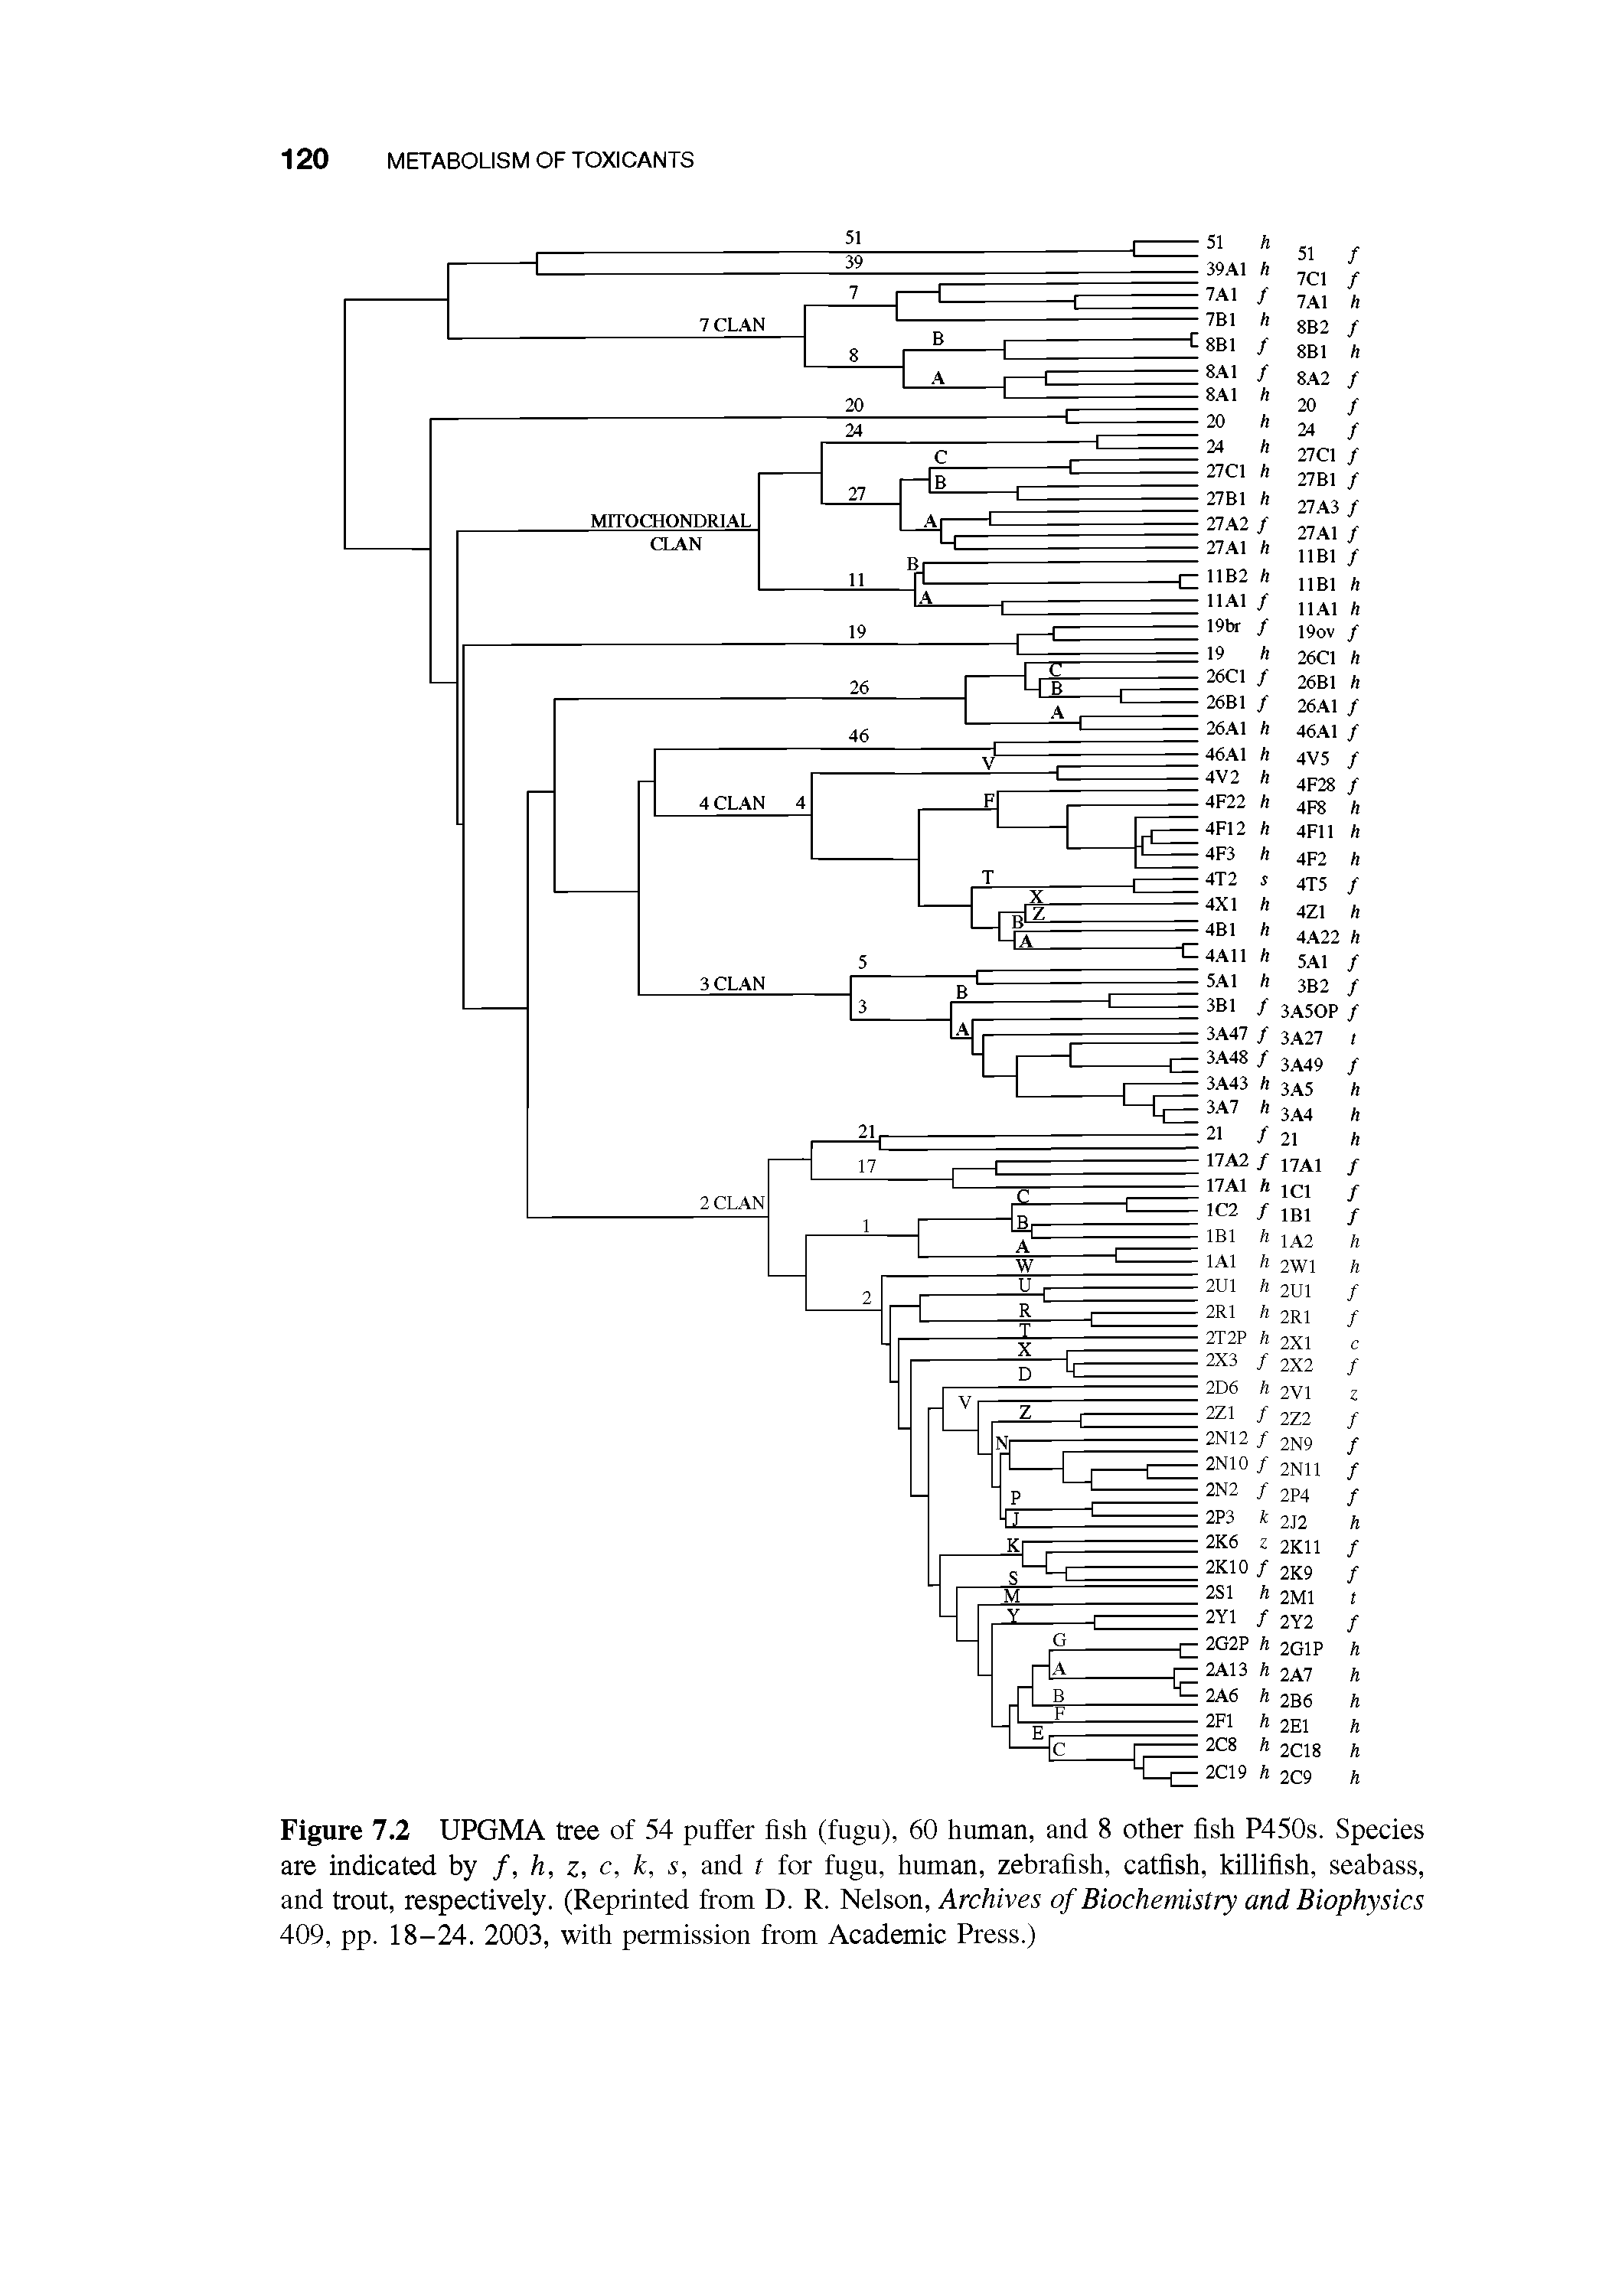 Figure 7.2 UPGMA tree of 54 puffer fish (fugu), 60 human, and 8 other fish P450s. Species are indicated by /, h, z, c, k, s, and t for fugu, human, zebrafish, catfish, killifish, seabass, and trout, respectively. (Reprinted from D. R. Nelson, Archives of Biochemistry and Biophysics 409, pp. 18-24. 2003, with permission from Academic Press.)...